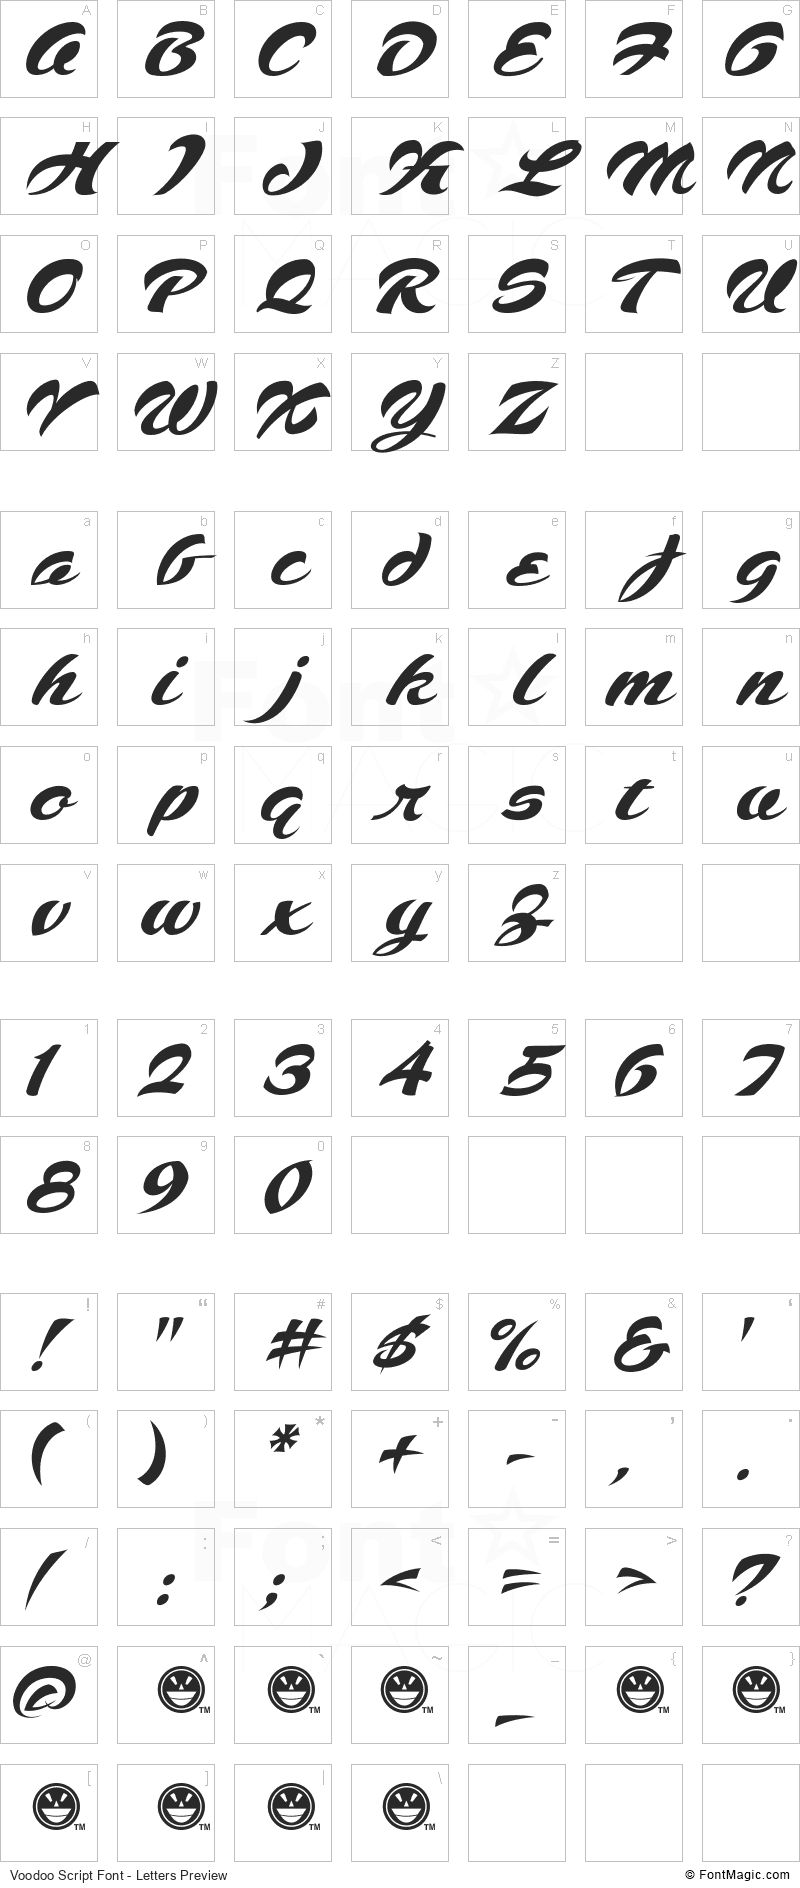 Voodoo Script Font - All Latters Preview Chart